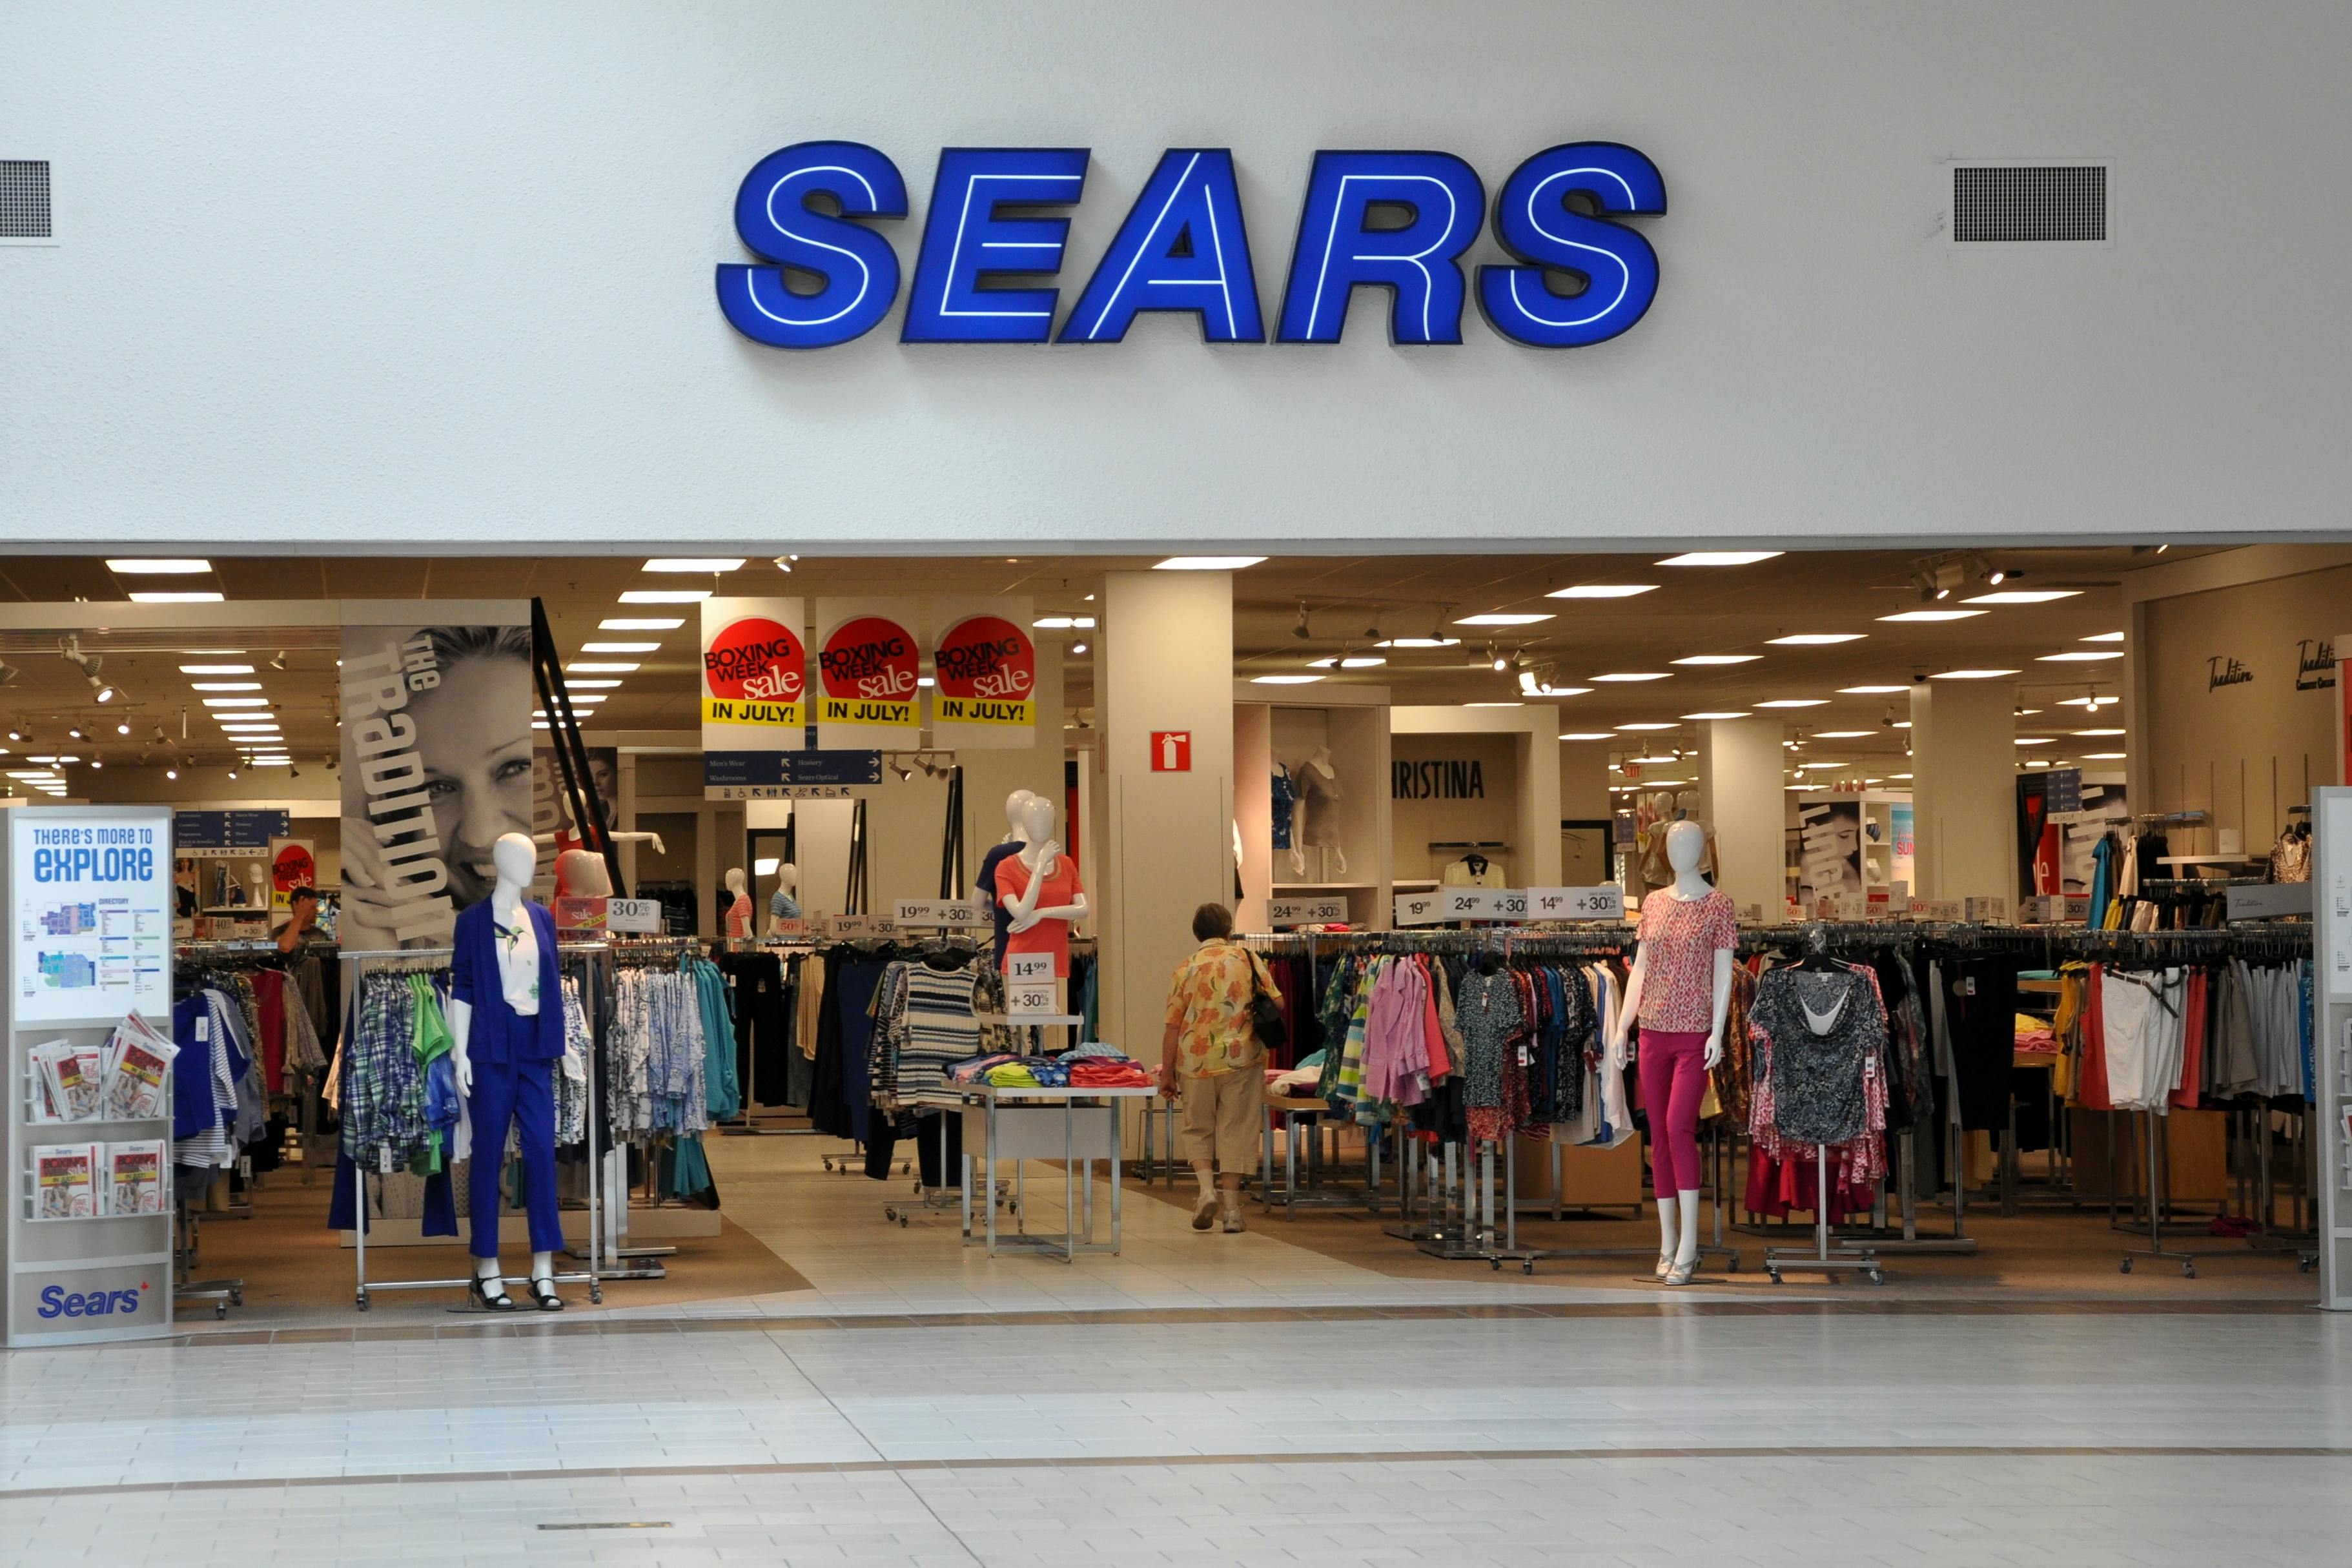 Sears store front entrance inside a mall.